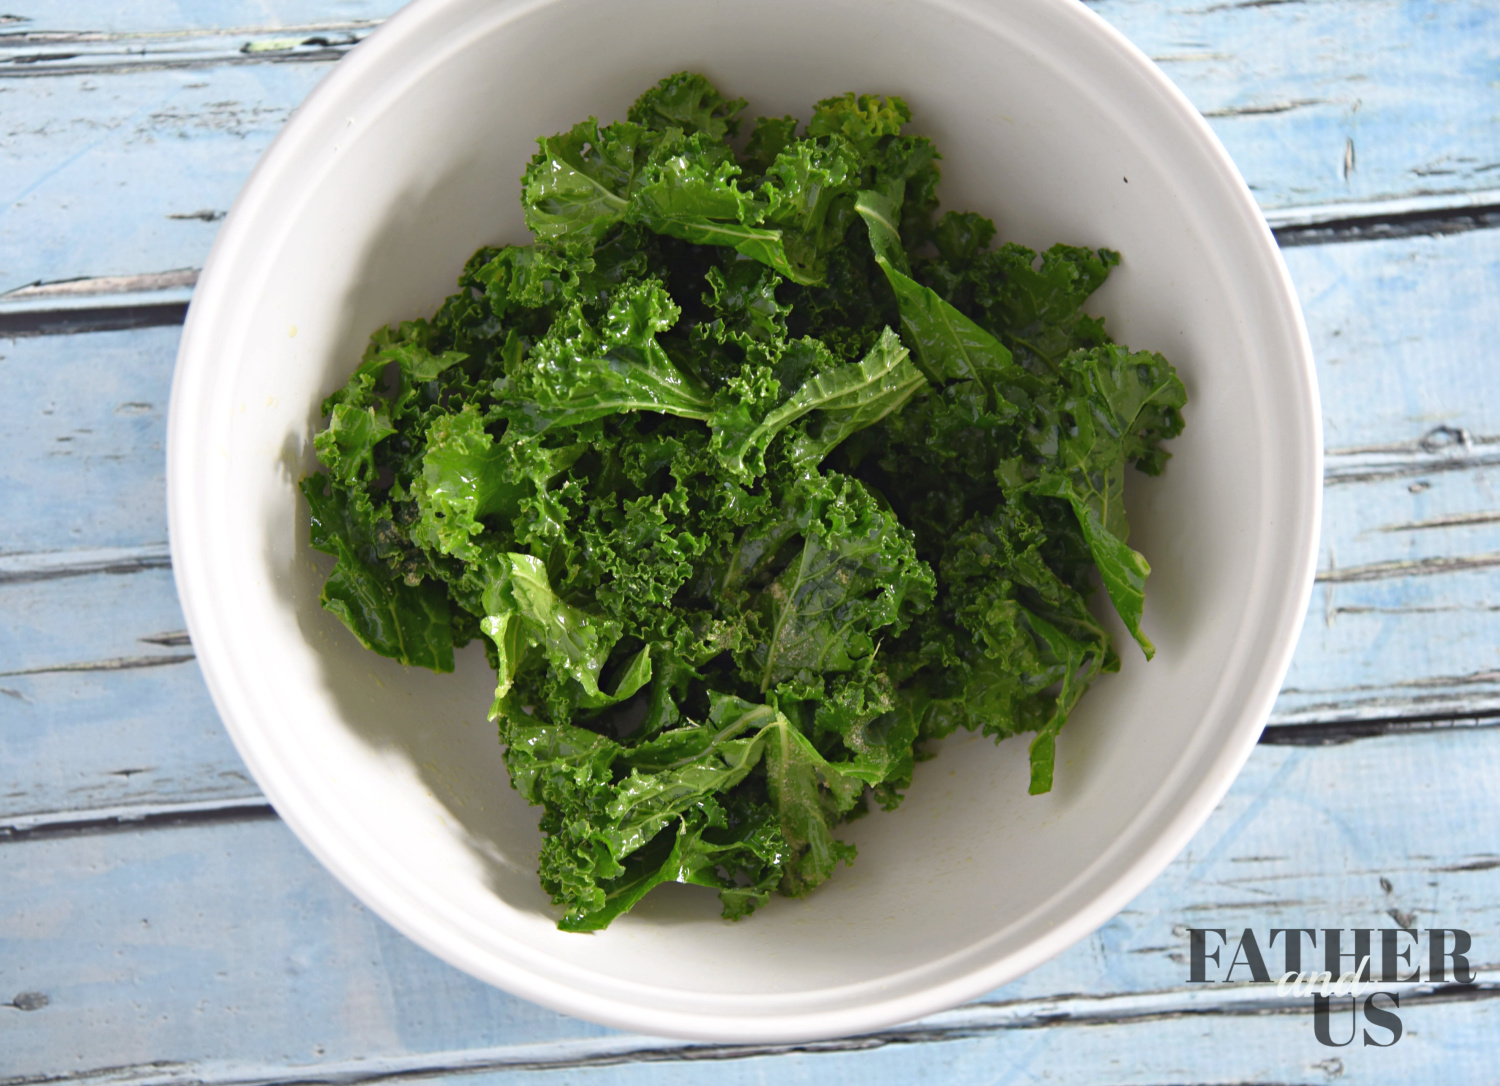 coat your kale air fryer with olive oil, making sure you cover it completely. 